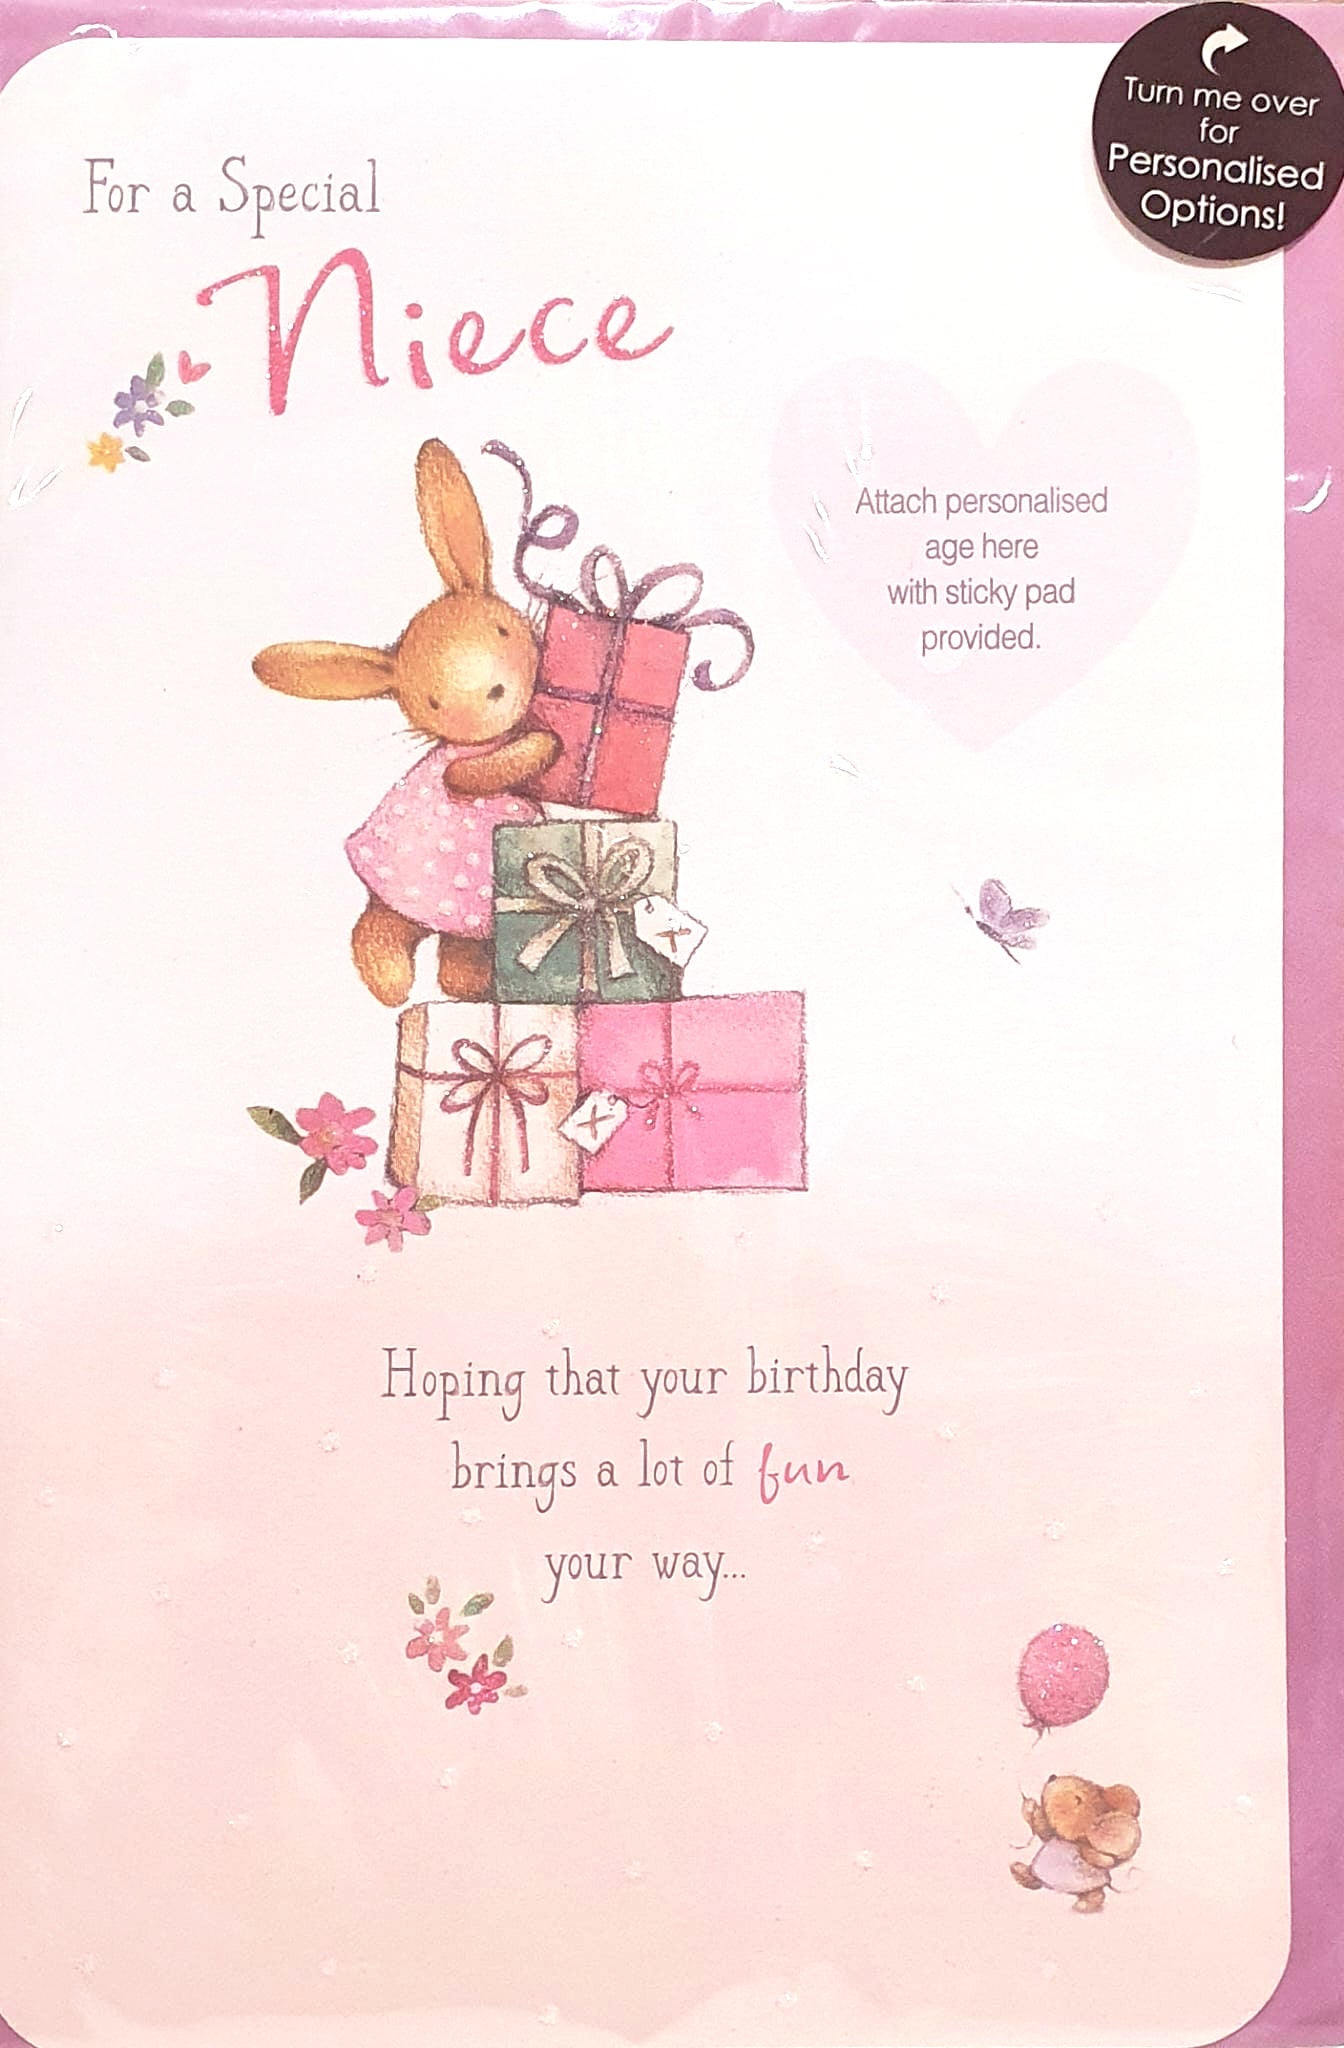 Niece Birthday Card - Bunny Stacking Presents - Personalised Options Upto Age 3